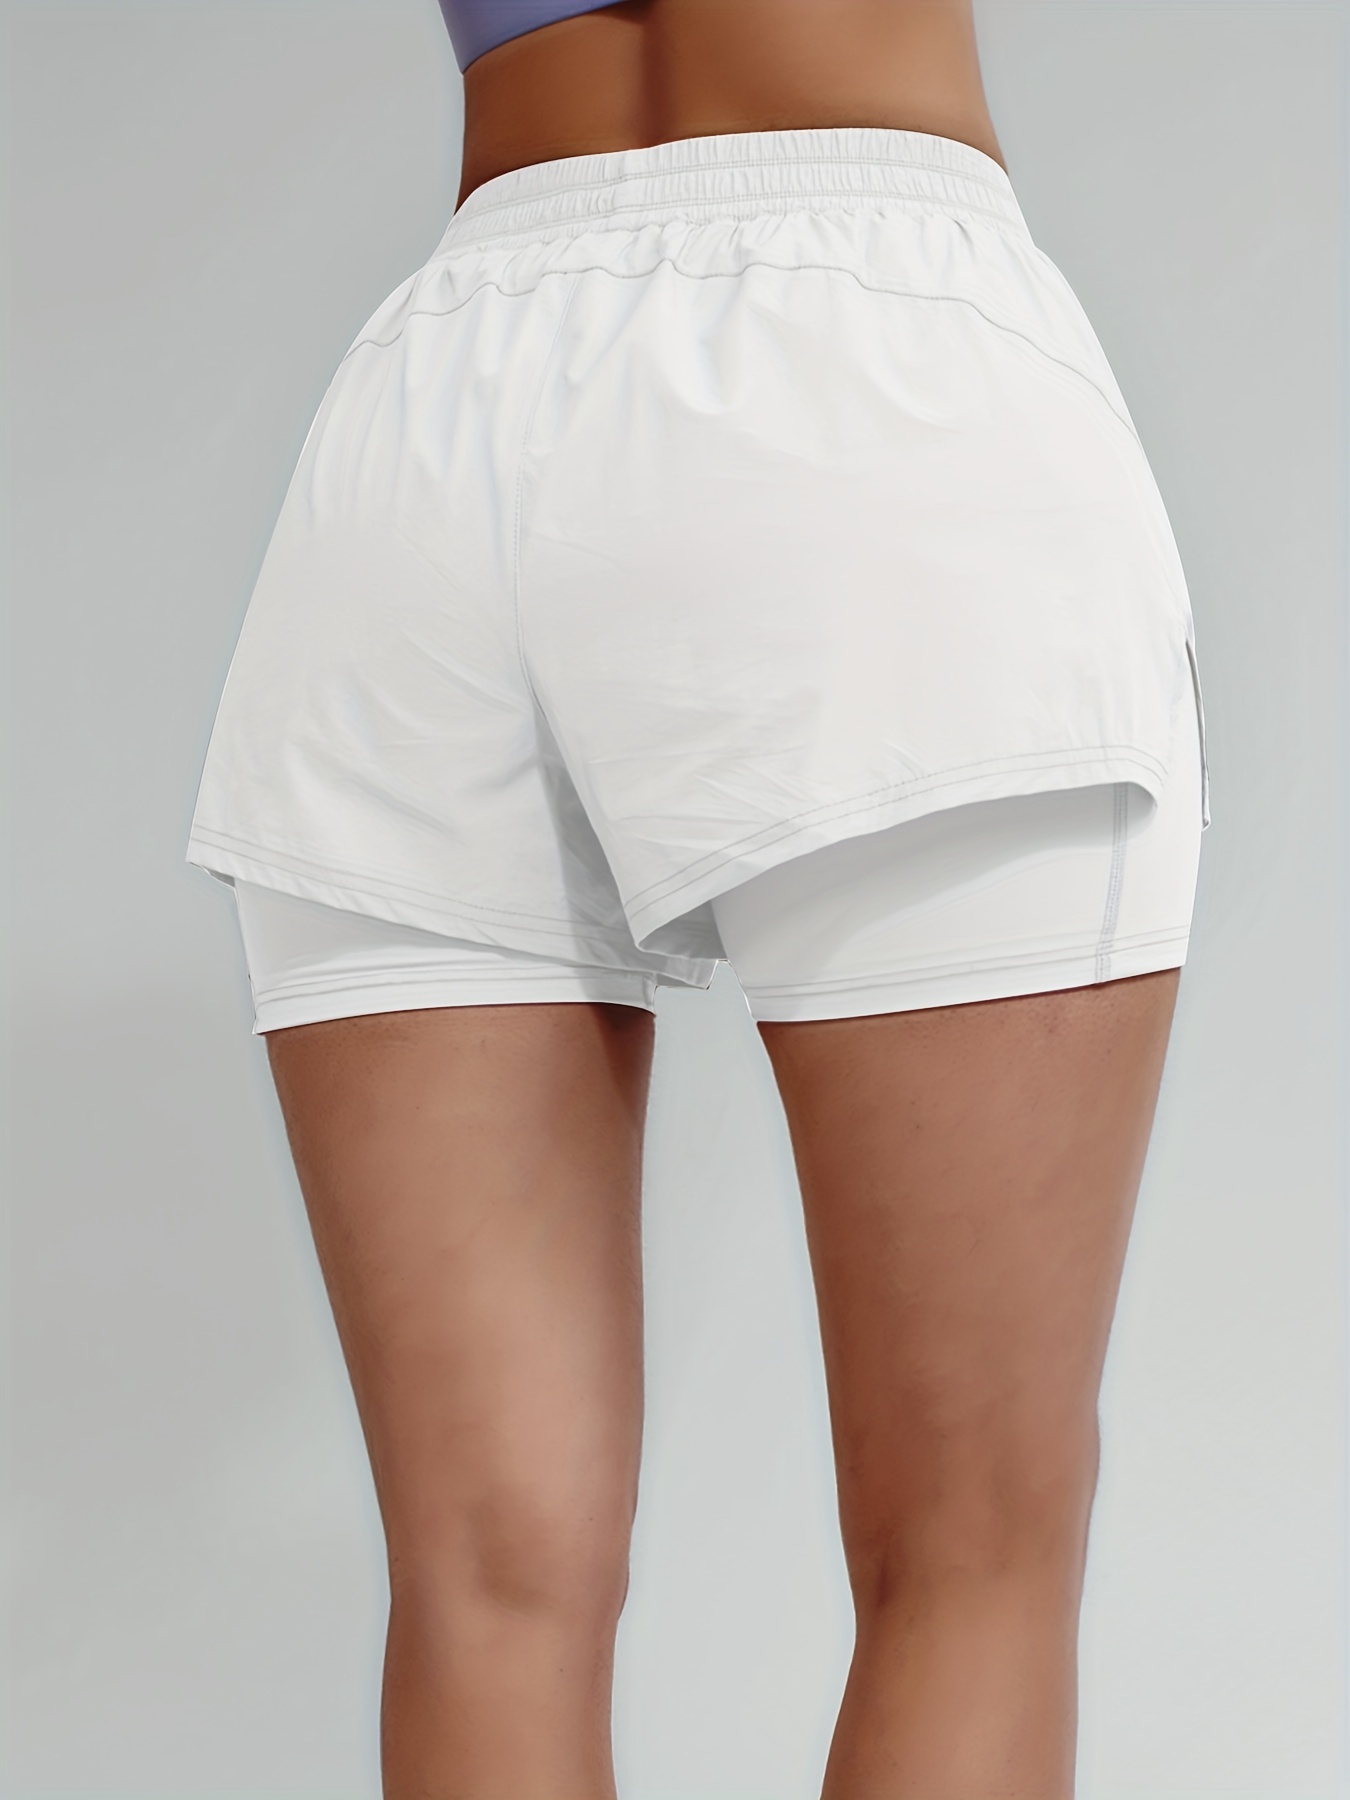 Womens Pleated Yoga Shorts Athletic Shorts For Women Quick Dry Gym Sports  Shorts High Waisted Workout Shorts Tennis Skirts With Pockets For Womens  Gym Shorts Pack From Hchome, $16.6